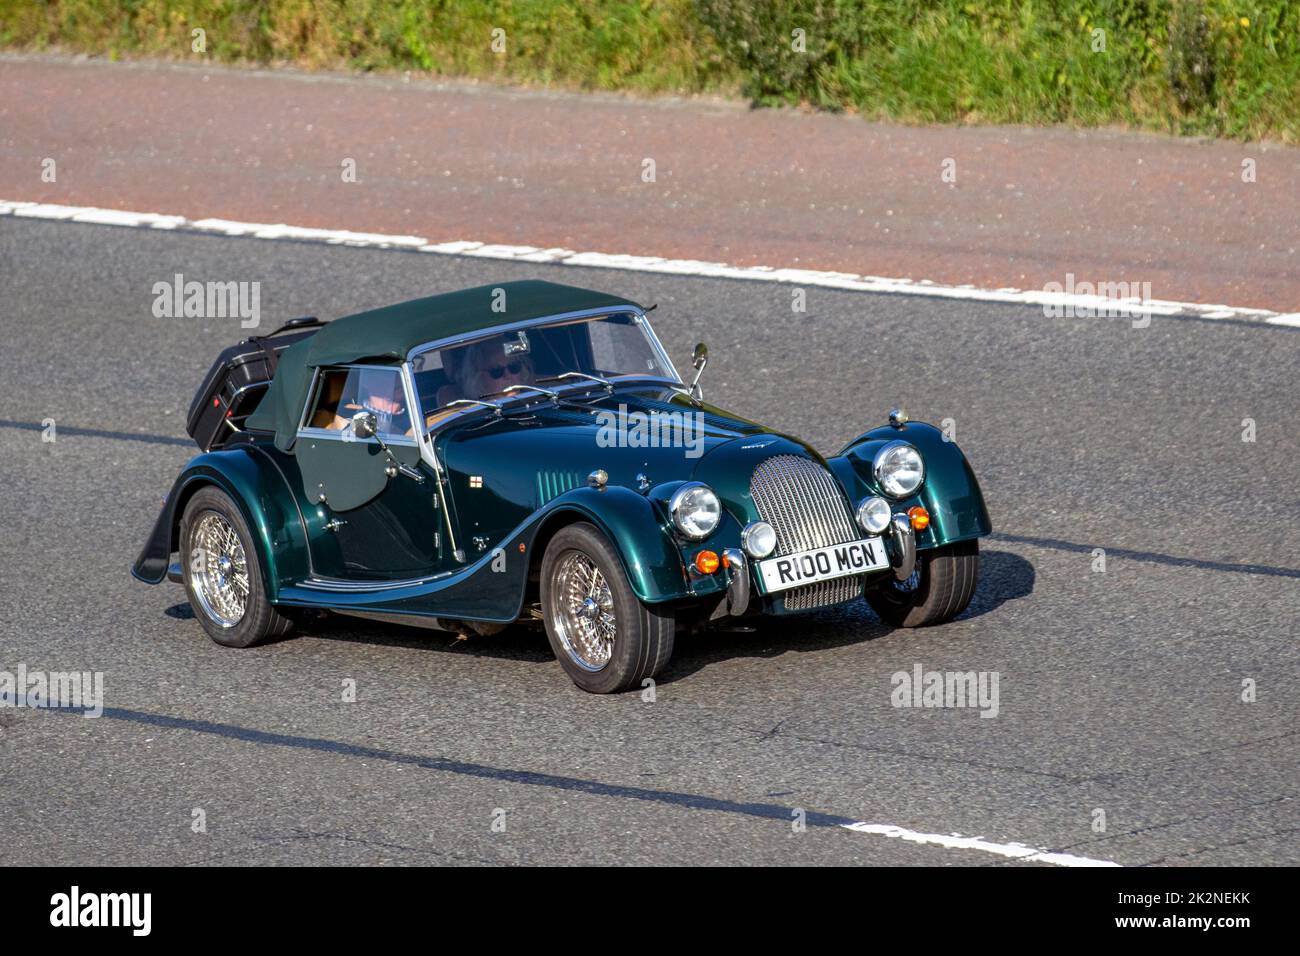 2009 Green MORGAN ROADSTER 2967cc Petrol sports car 5-speed manual; Convertible, convertibles soft-top, open-topped roadster, cabriolets, drop-tops, sportscars, roadster, cabriolet, open two-seater in Manchester UK Stock Photo